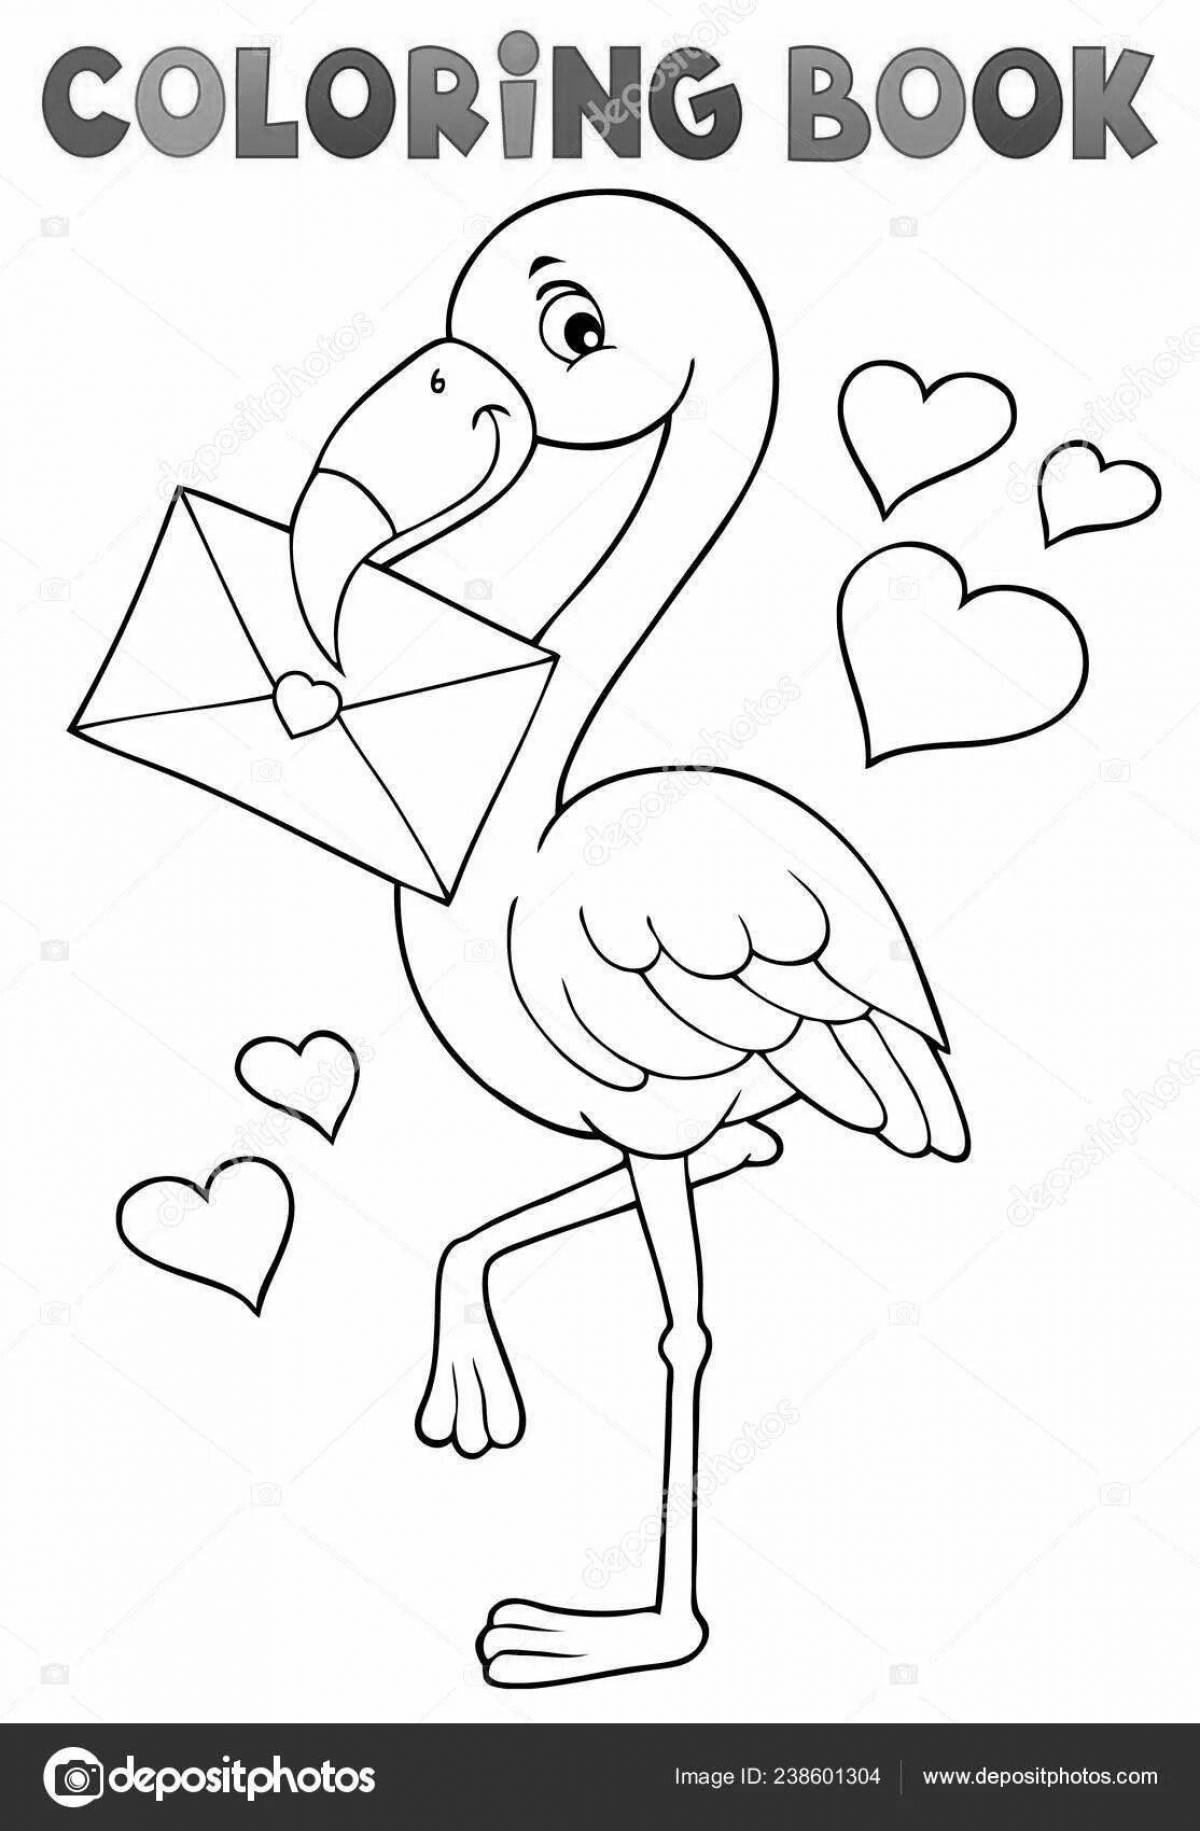 Adorable flamingo coloring page for girls